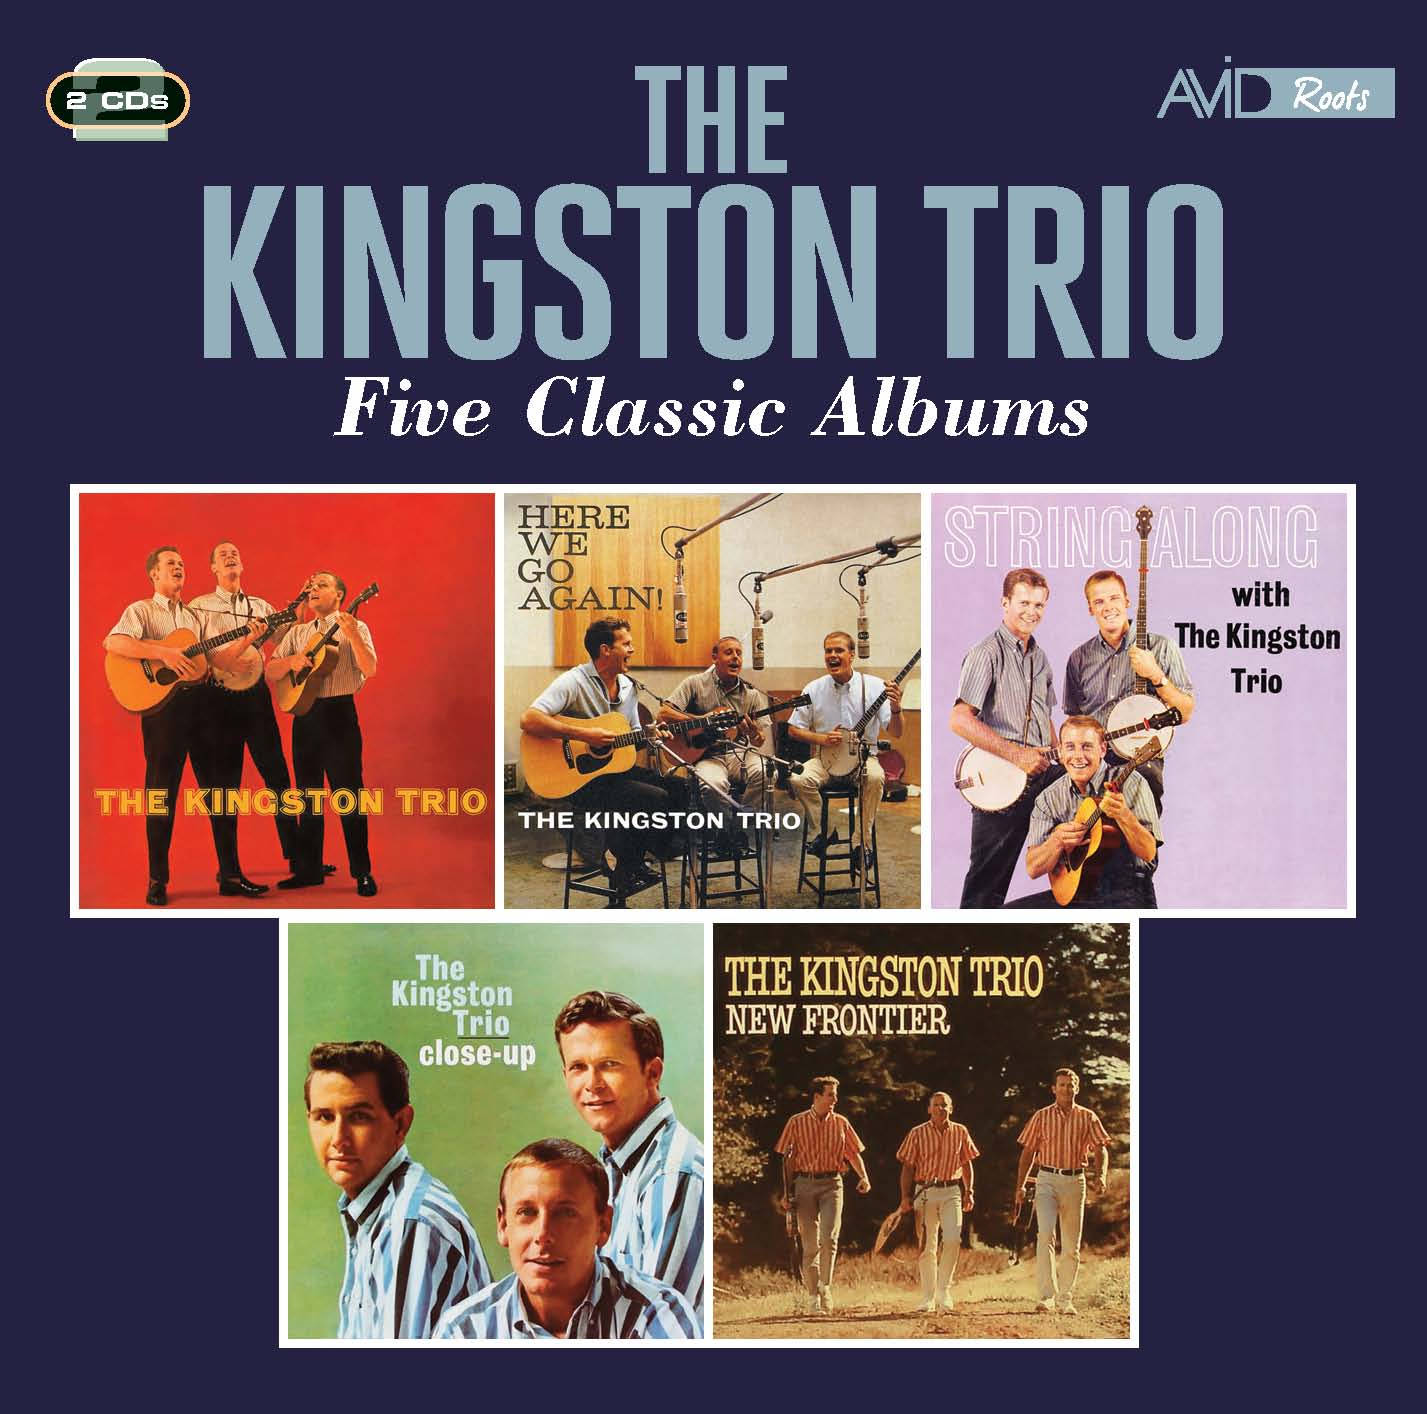 The Kingston Trio Legendary Albums Collection Wallpaper